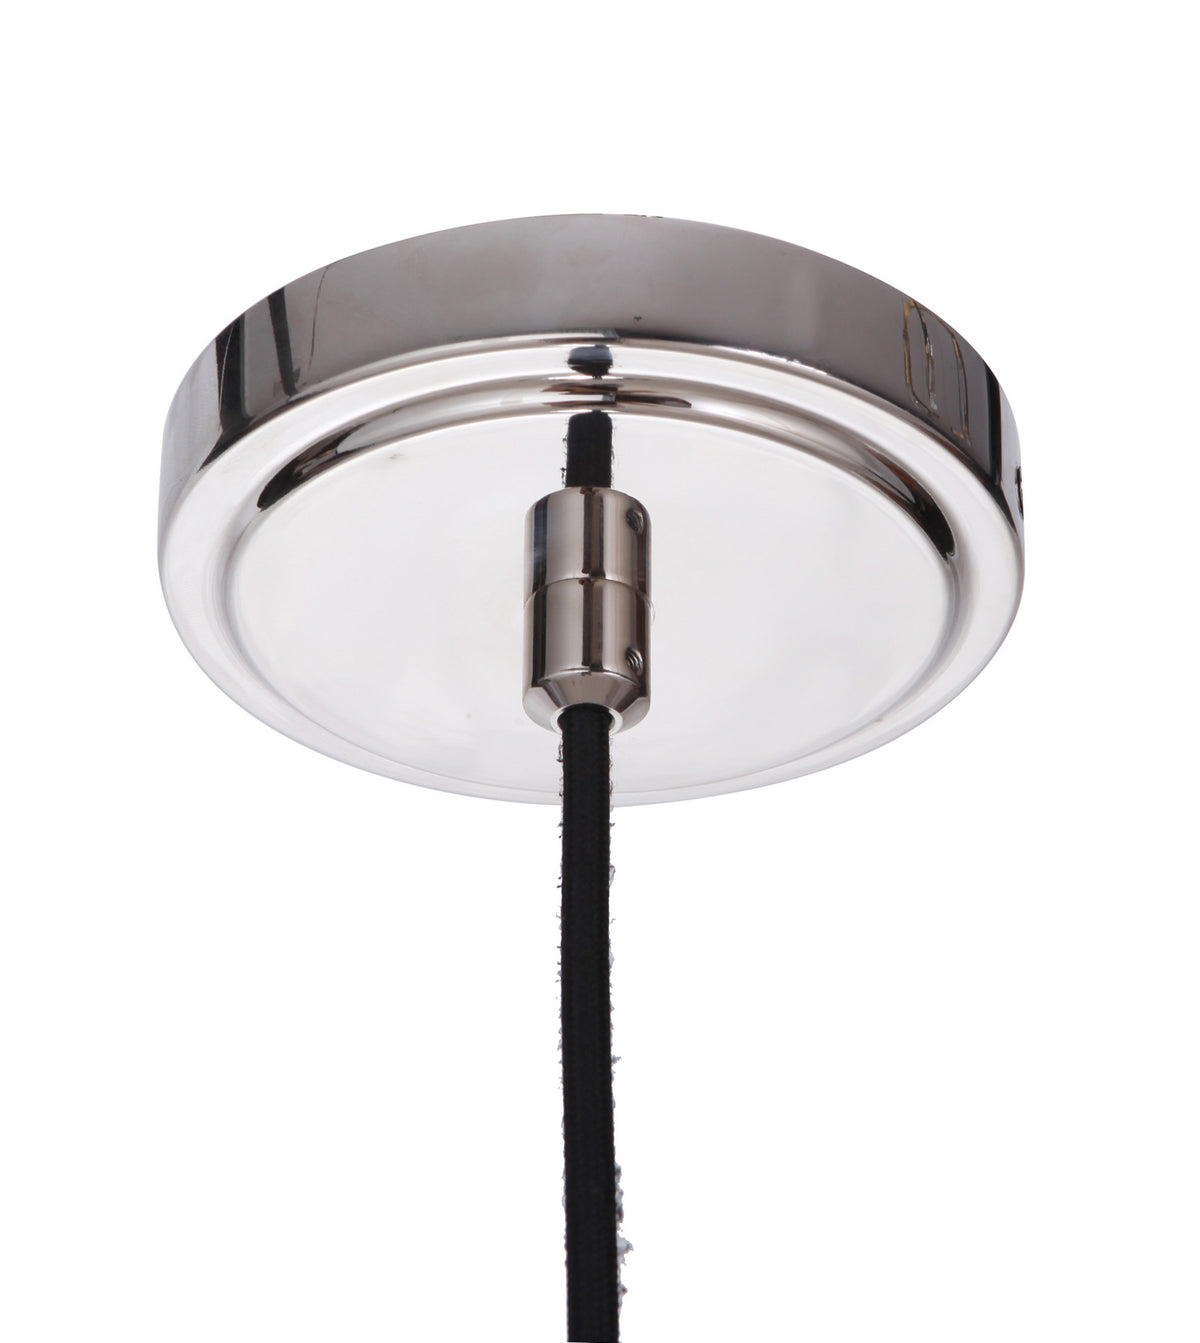 Craftmade One Light Pendant from the Hagen collection in Polished Nickel finish